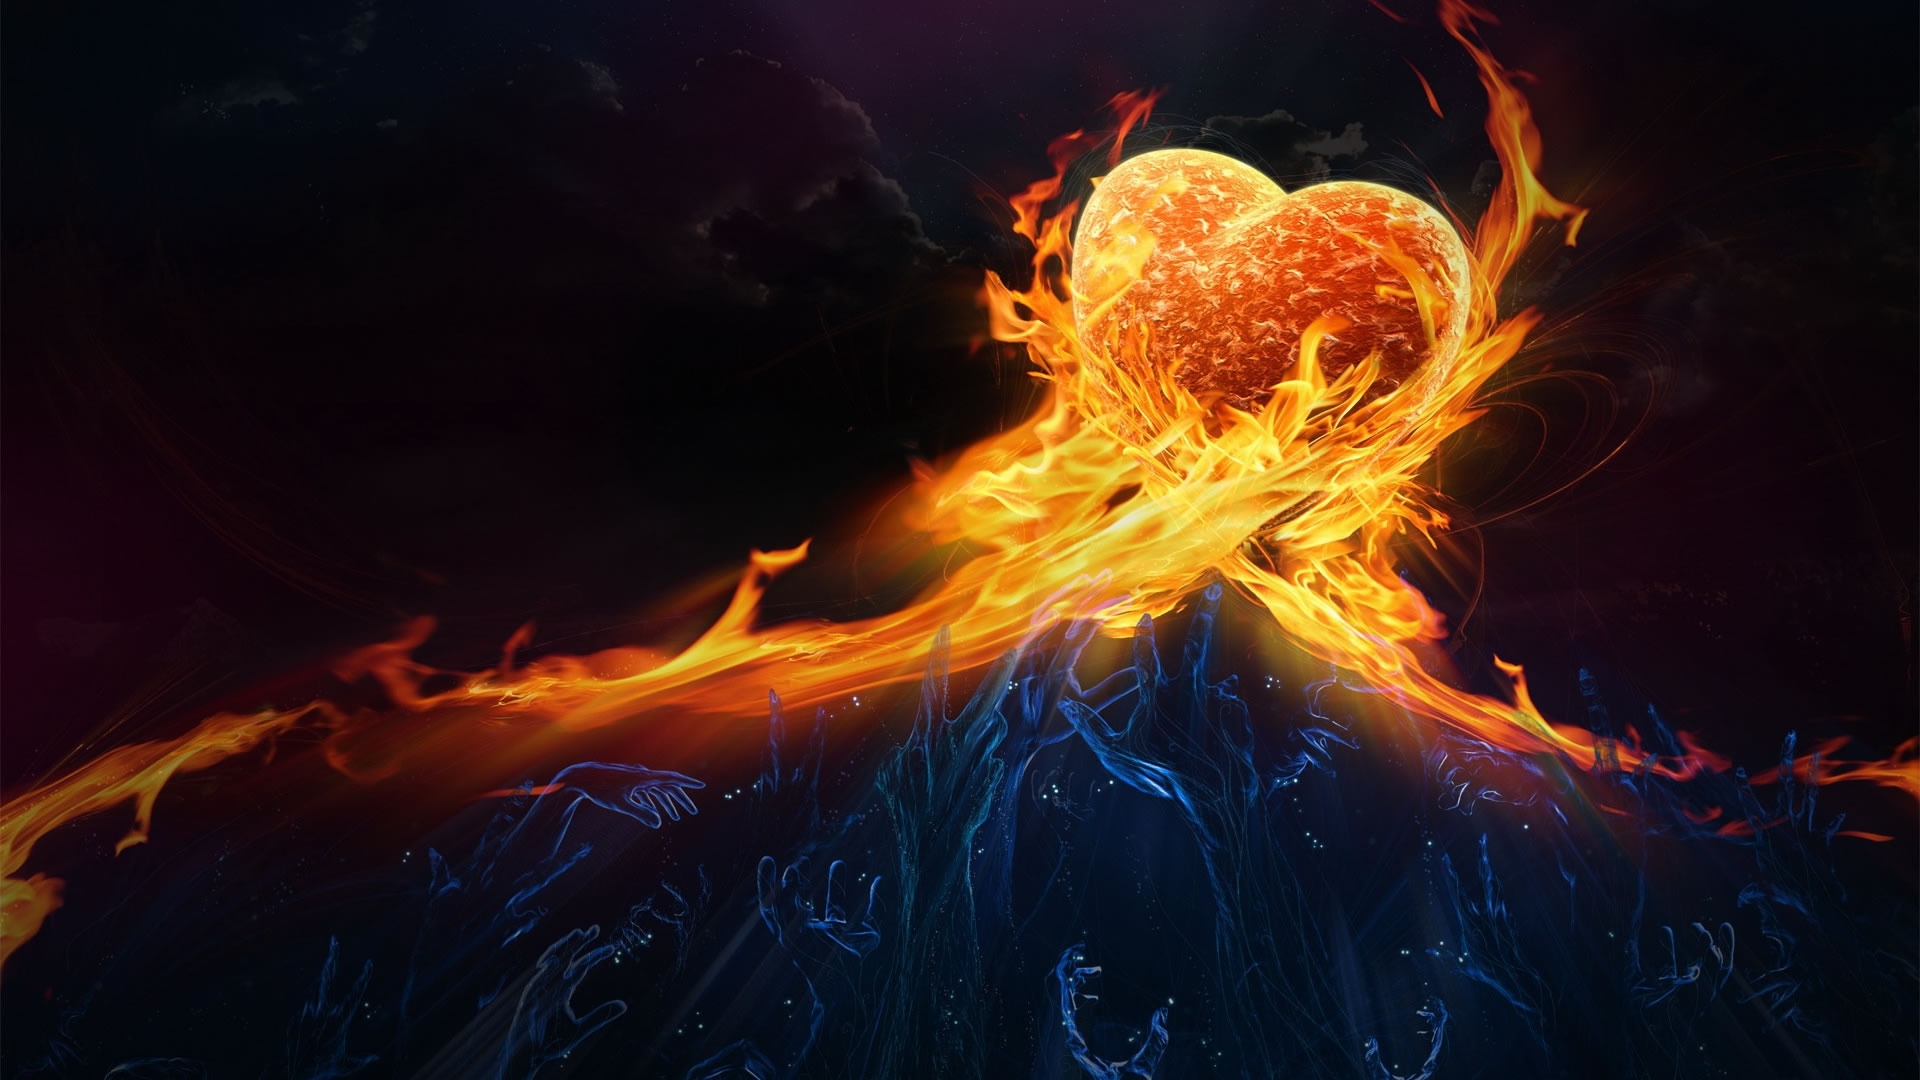 Heart in Fire for 1920 x 1080 HDTV 1080p resolution